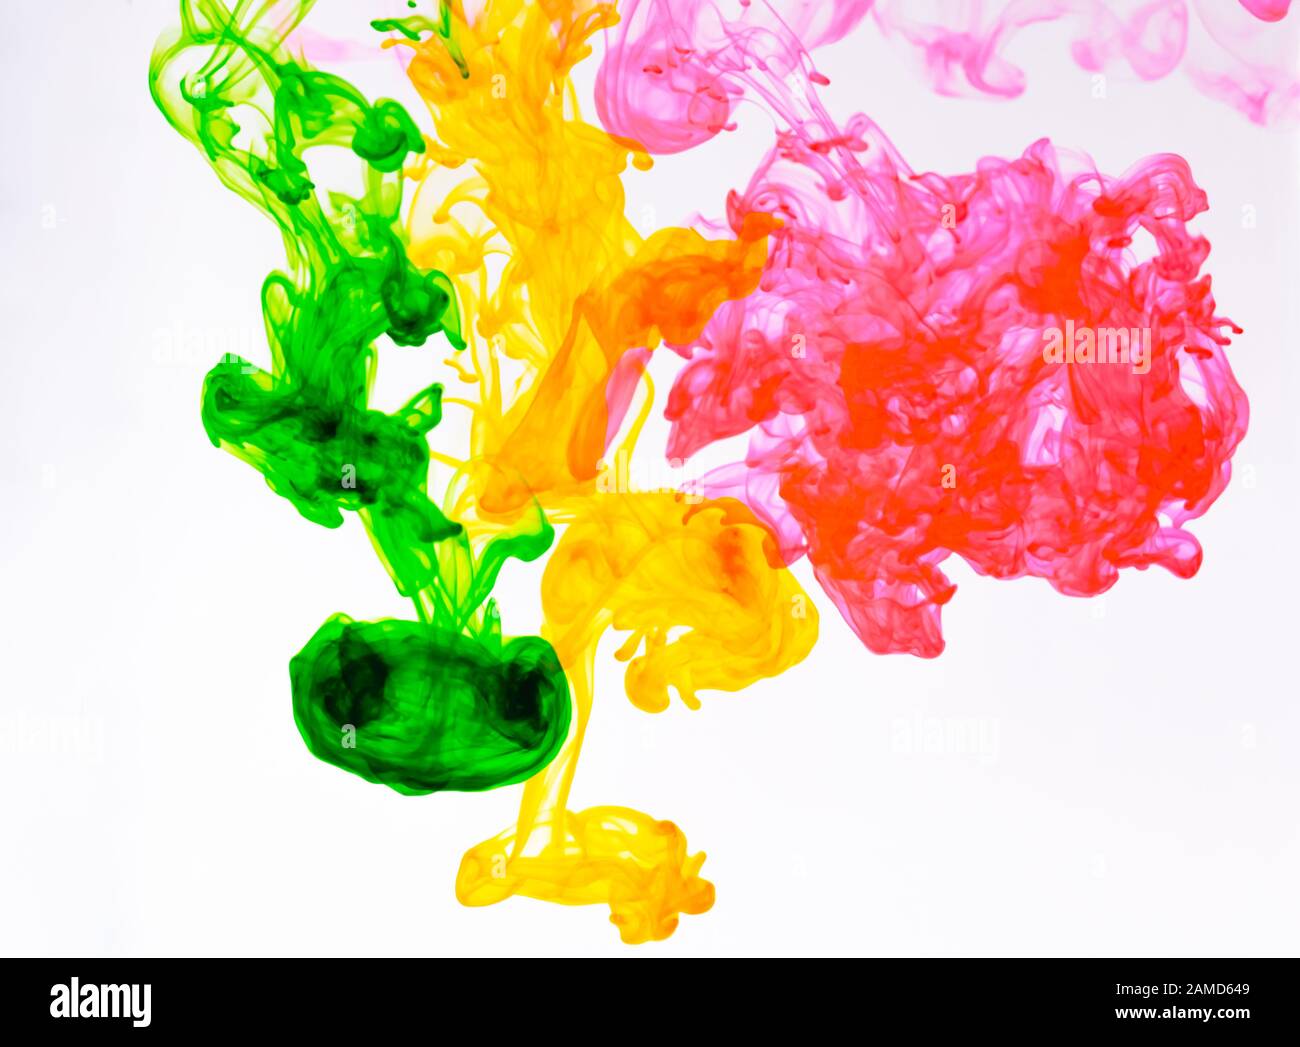 Food color drop and dissolve in water for abstract and background. Stock Photo